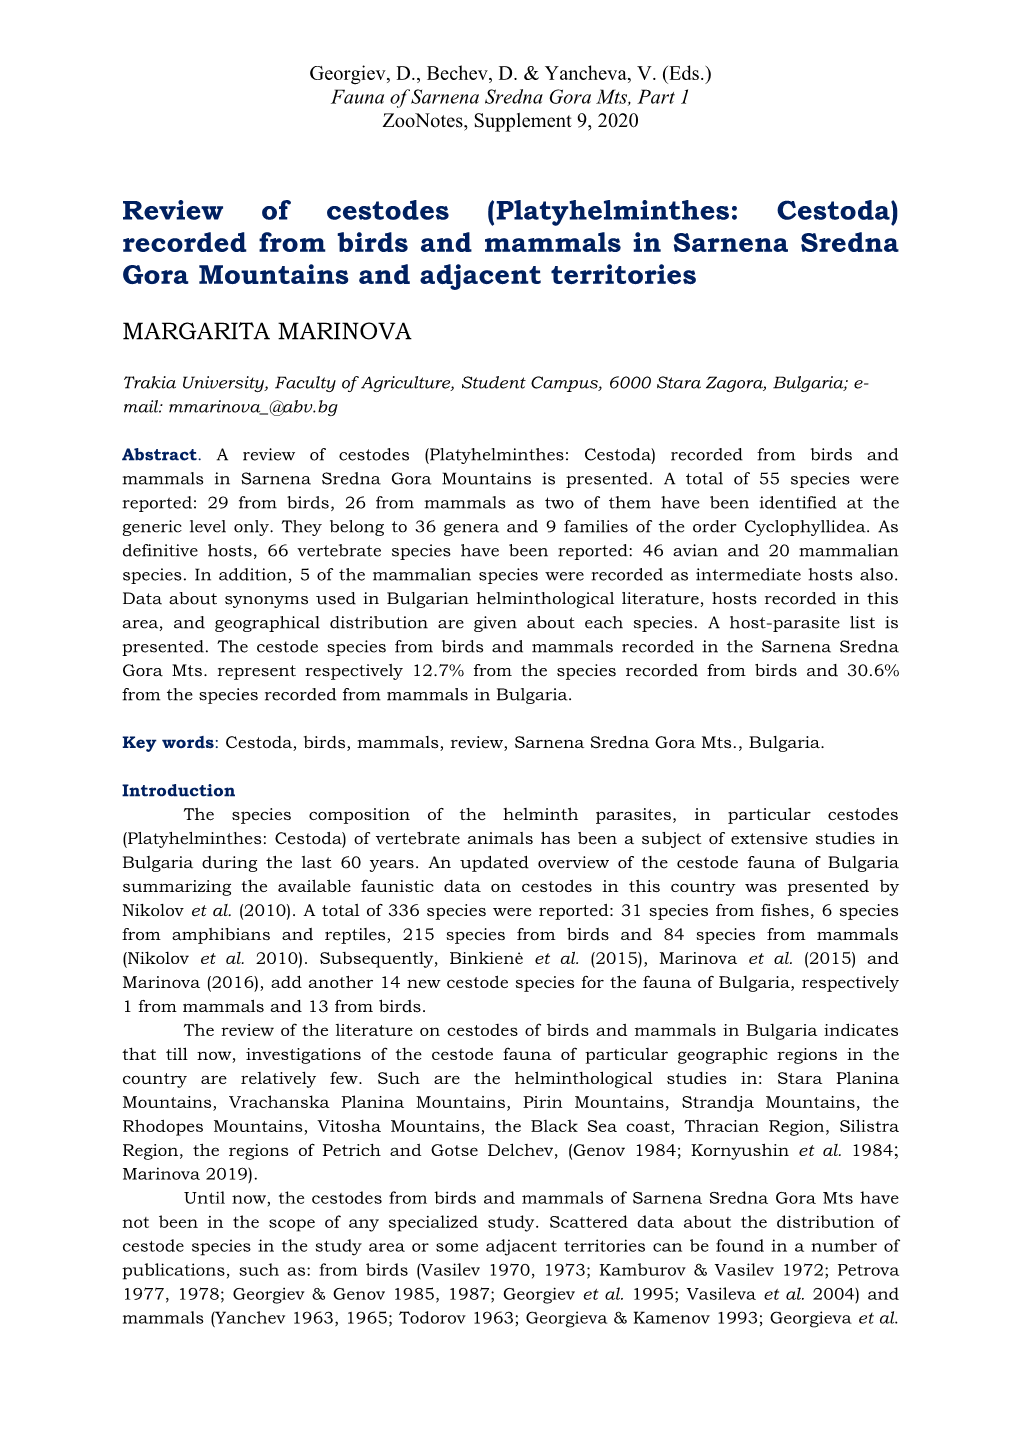 Review of Cestodes (Platyhelminthes: Cestoda) Recorded from Birds and Mammals in Sarnena Sredna Gora Mountains and Adjacent Territories